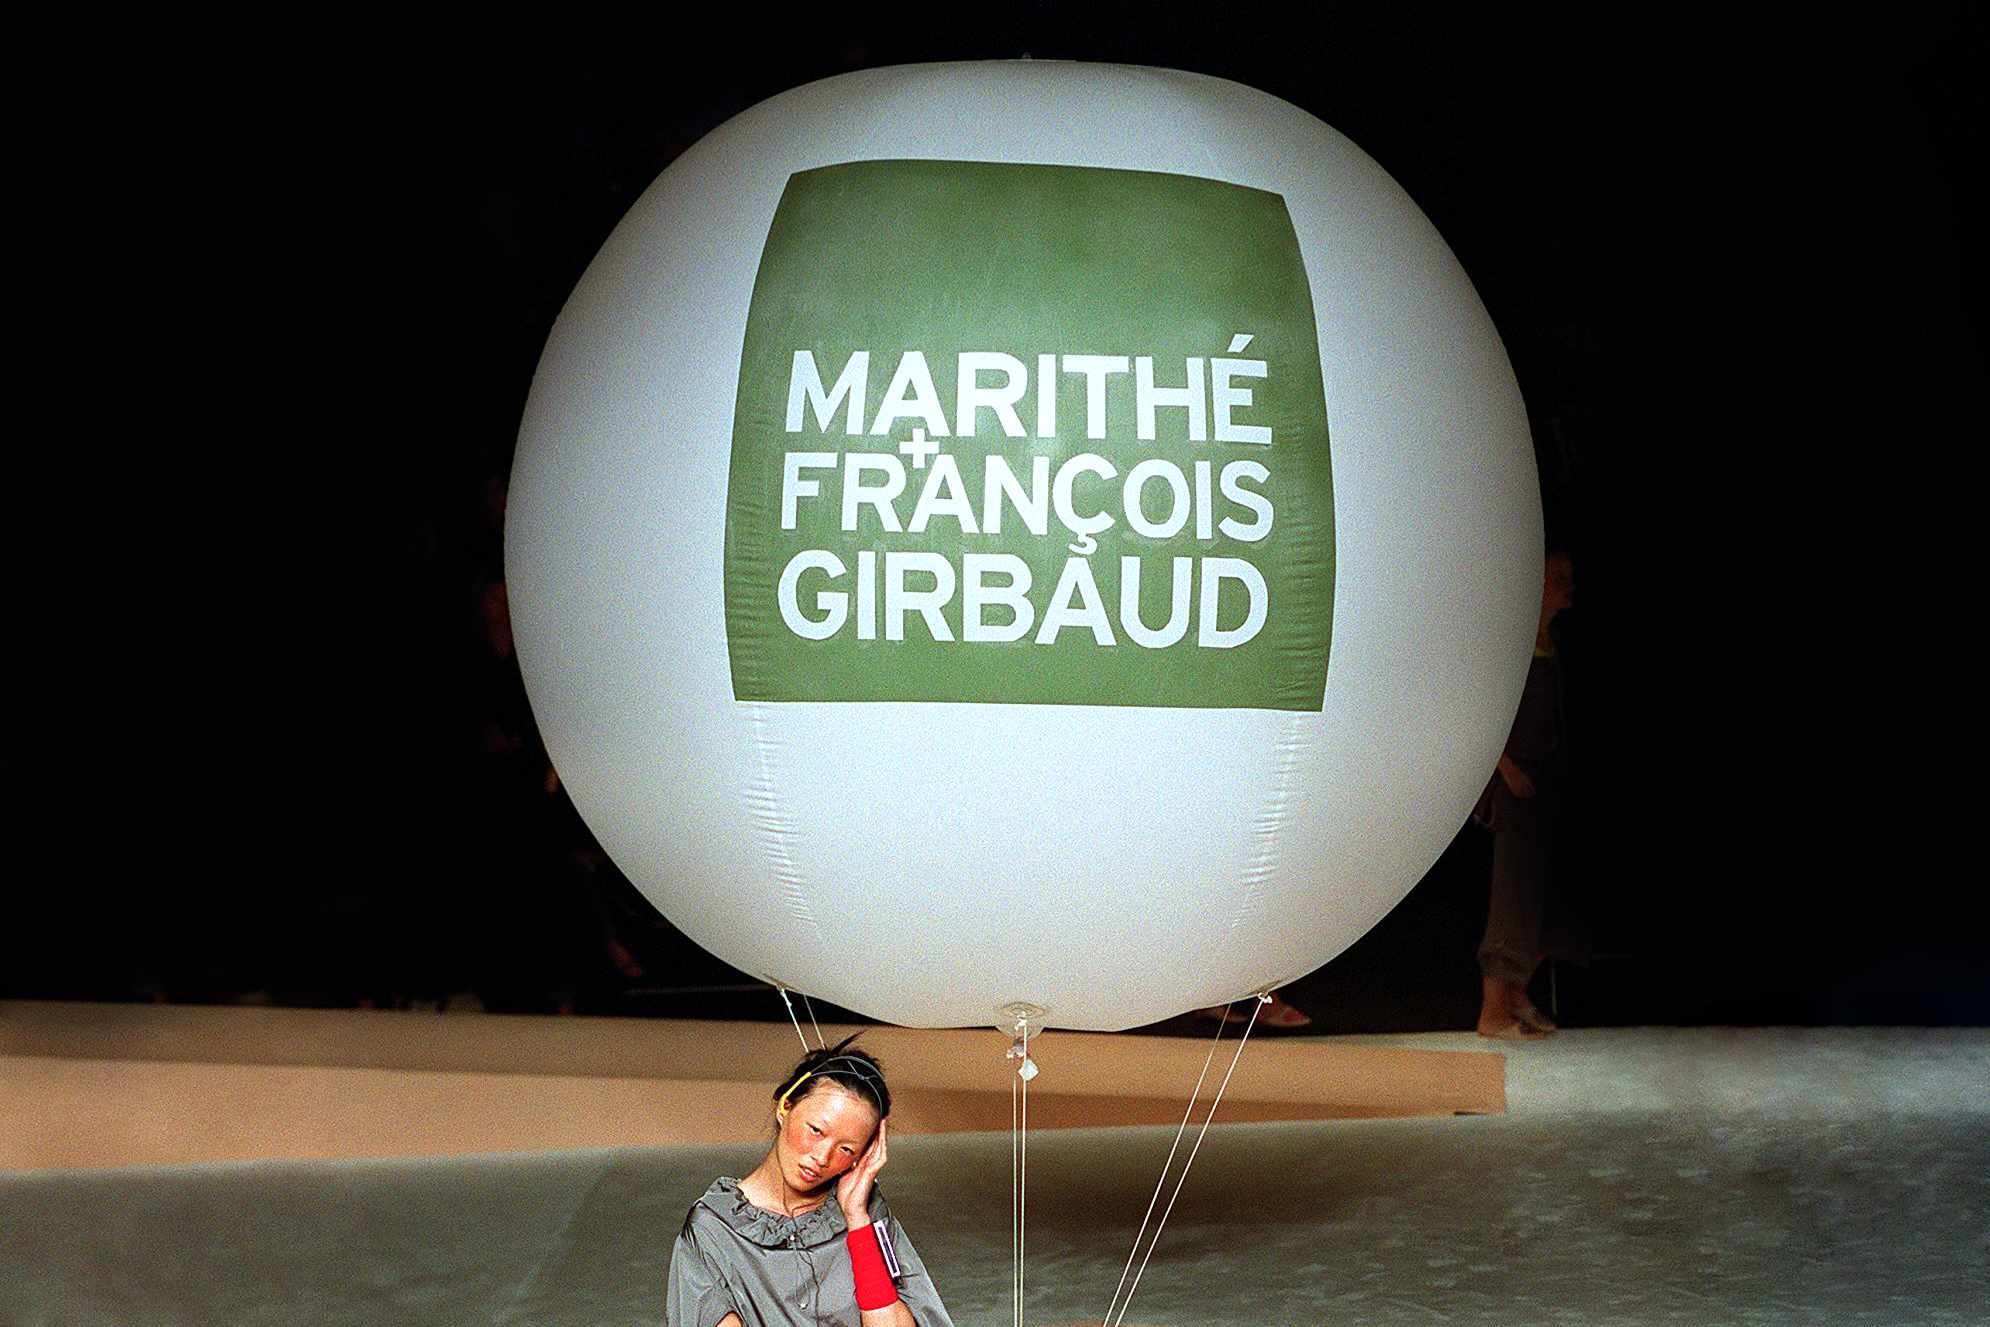 A model poses with a large white balloon with a green Marithe + Francois Girbaud logo